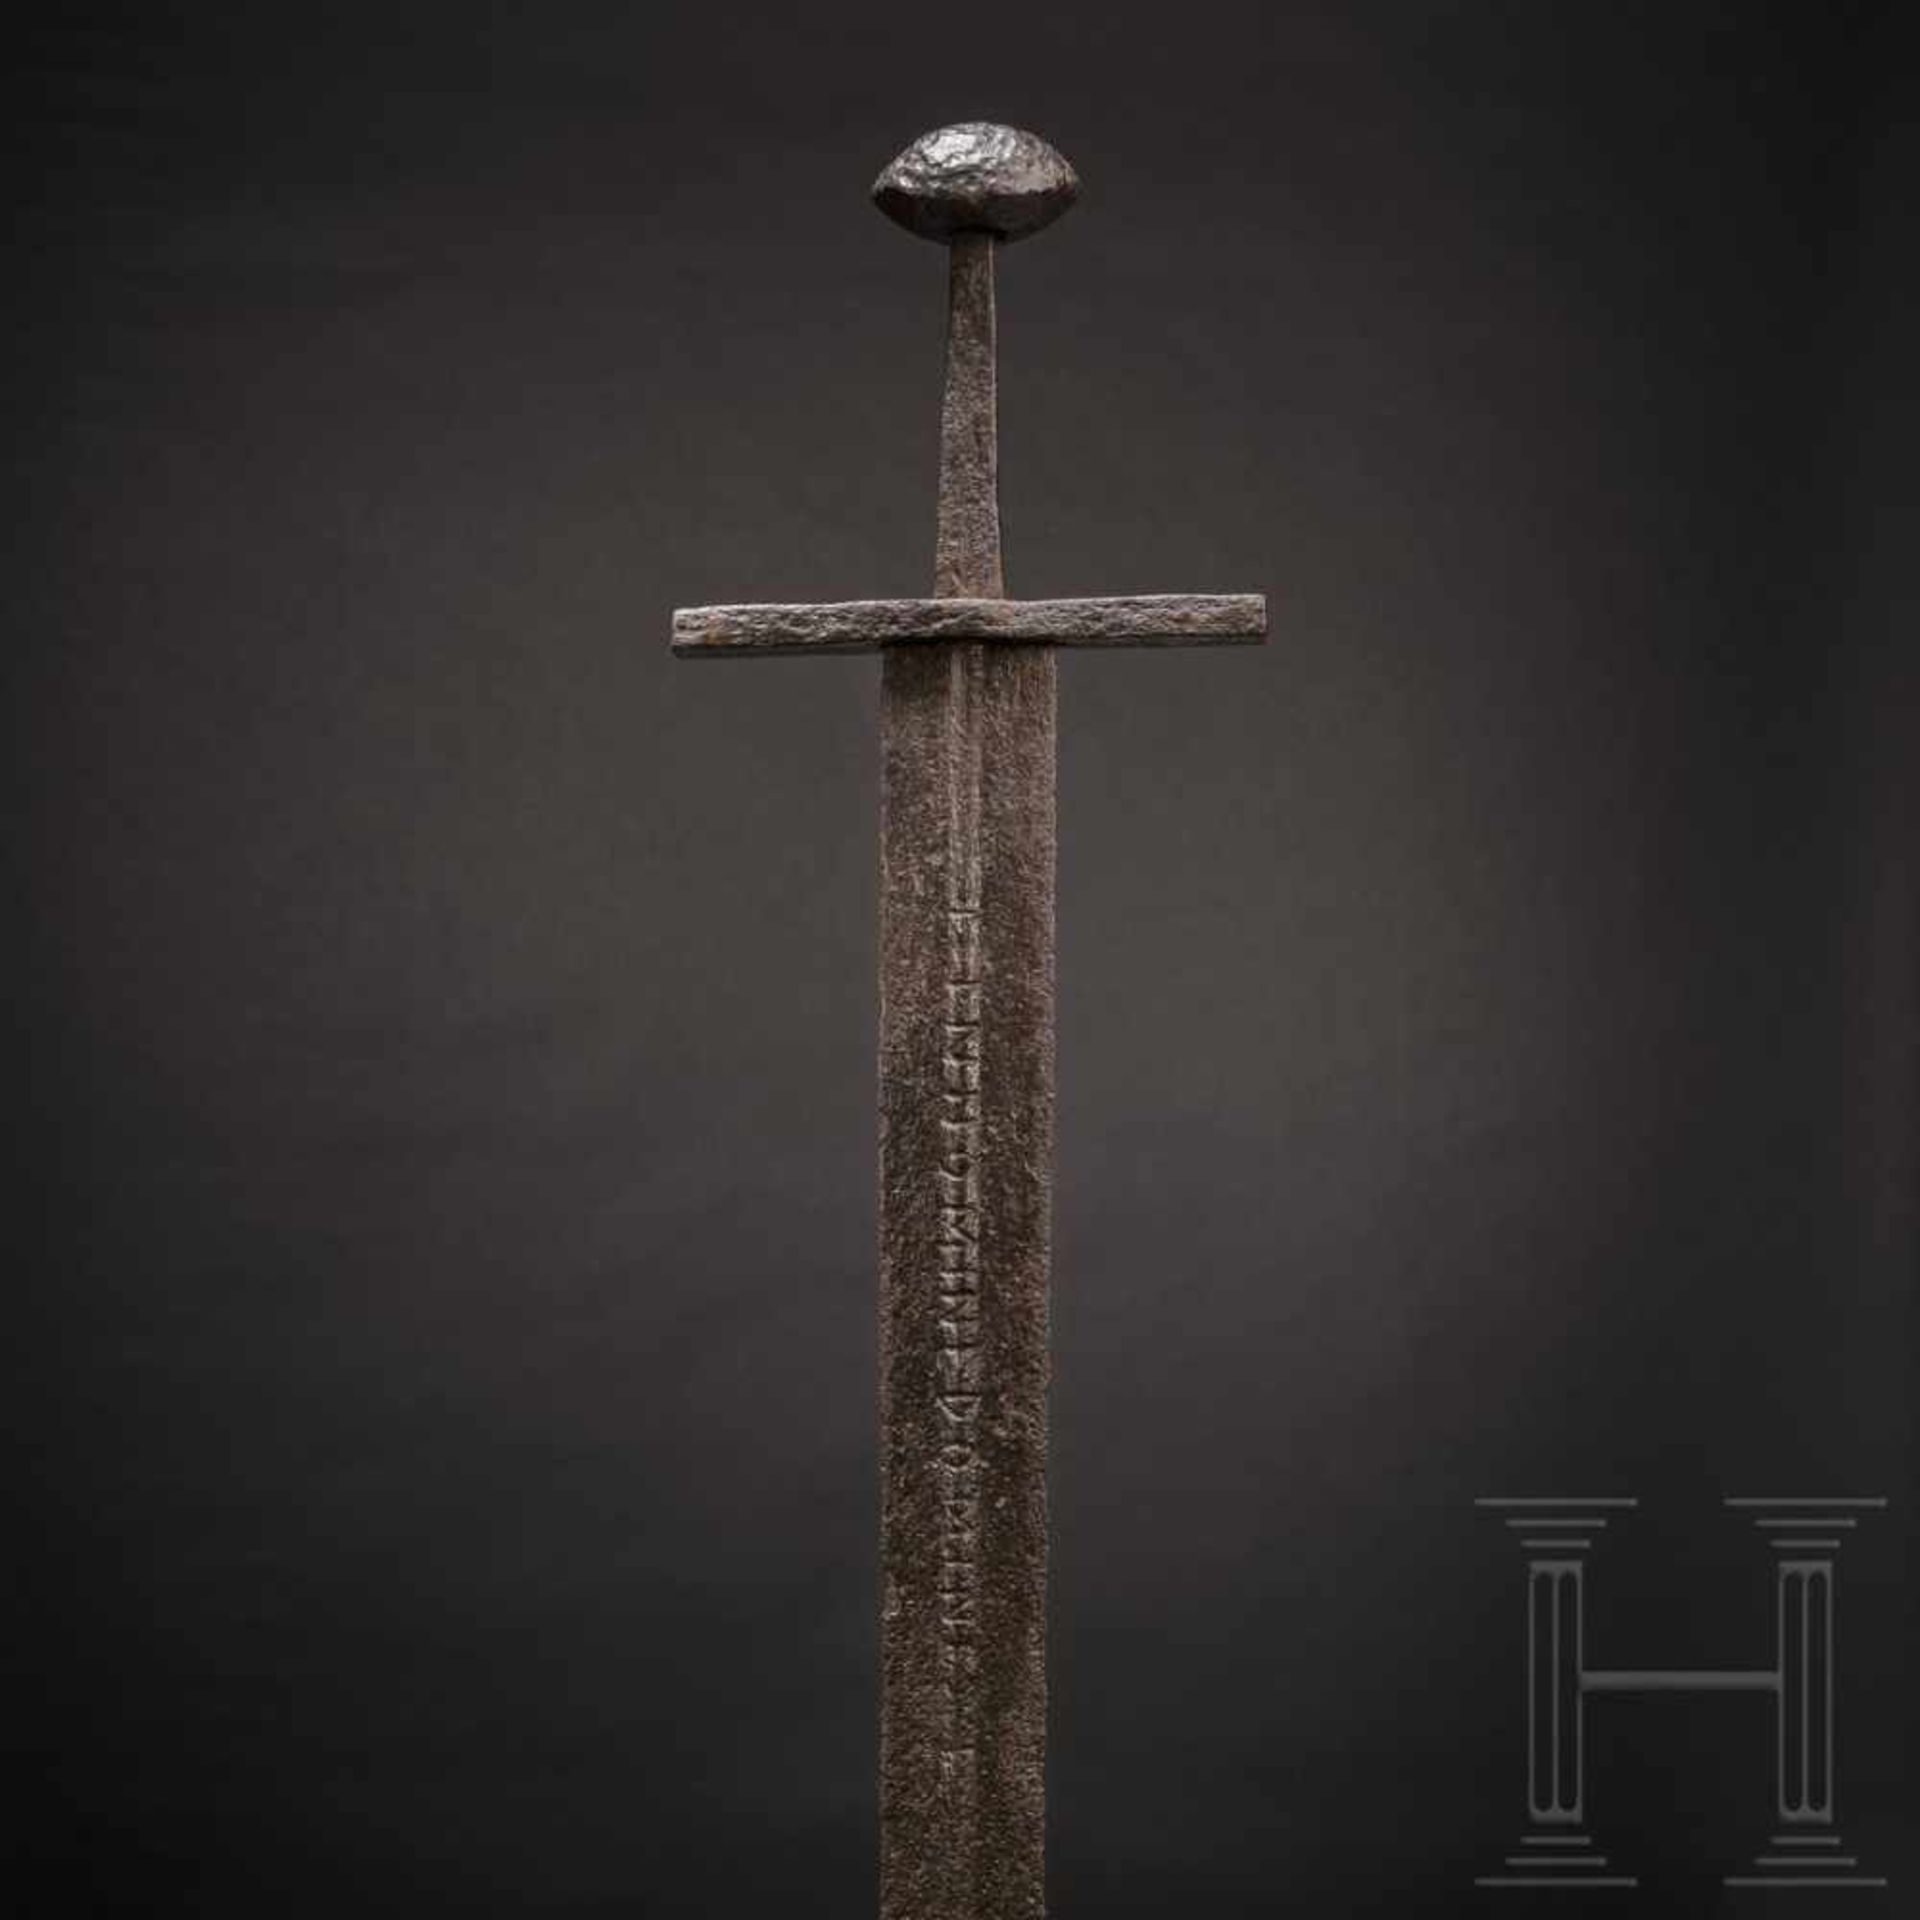 A German knightly sword, circa 1100 – 1150Sturdy, double-edged blade of lenticular cross-section.